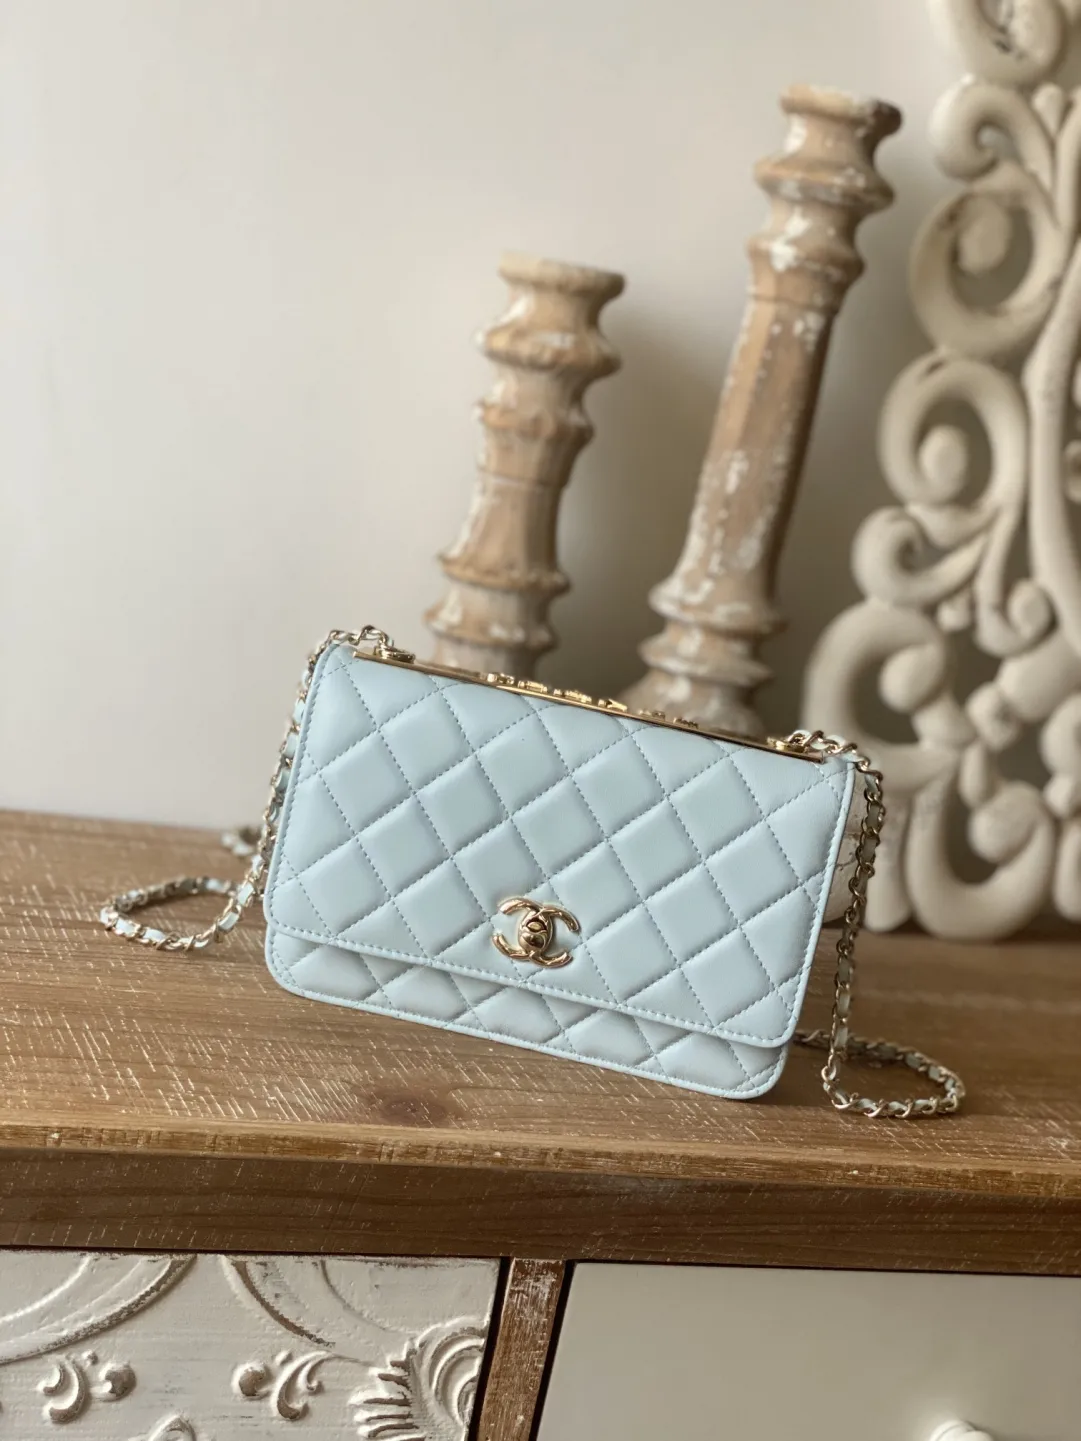 Chanel Wallet On Chain replica - Affordable Luxury Bags